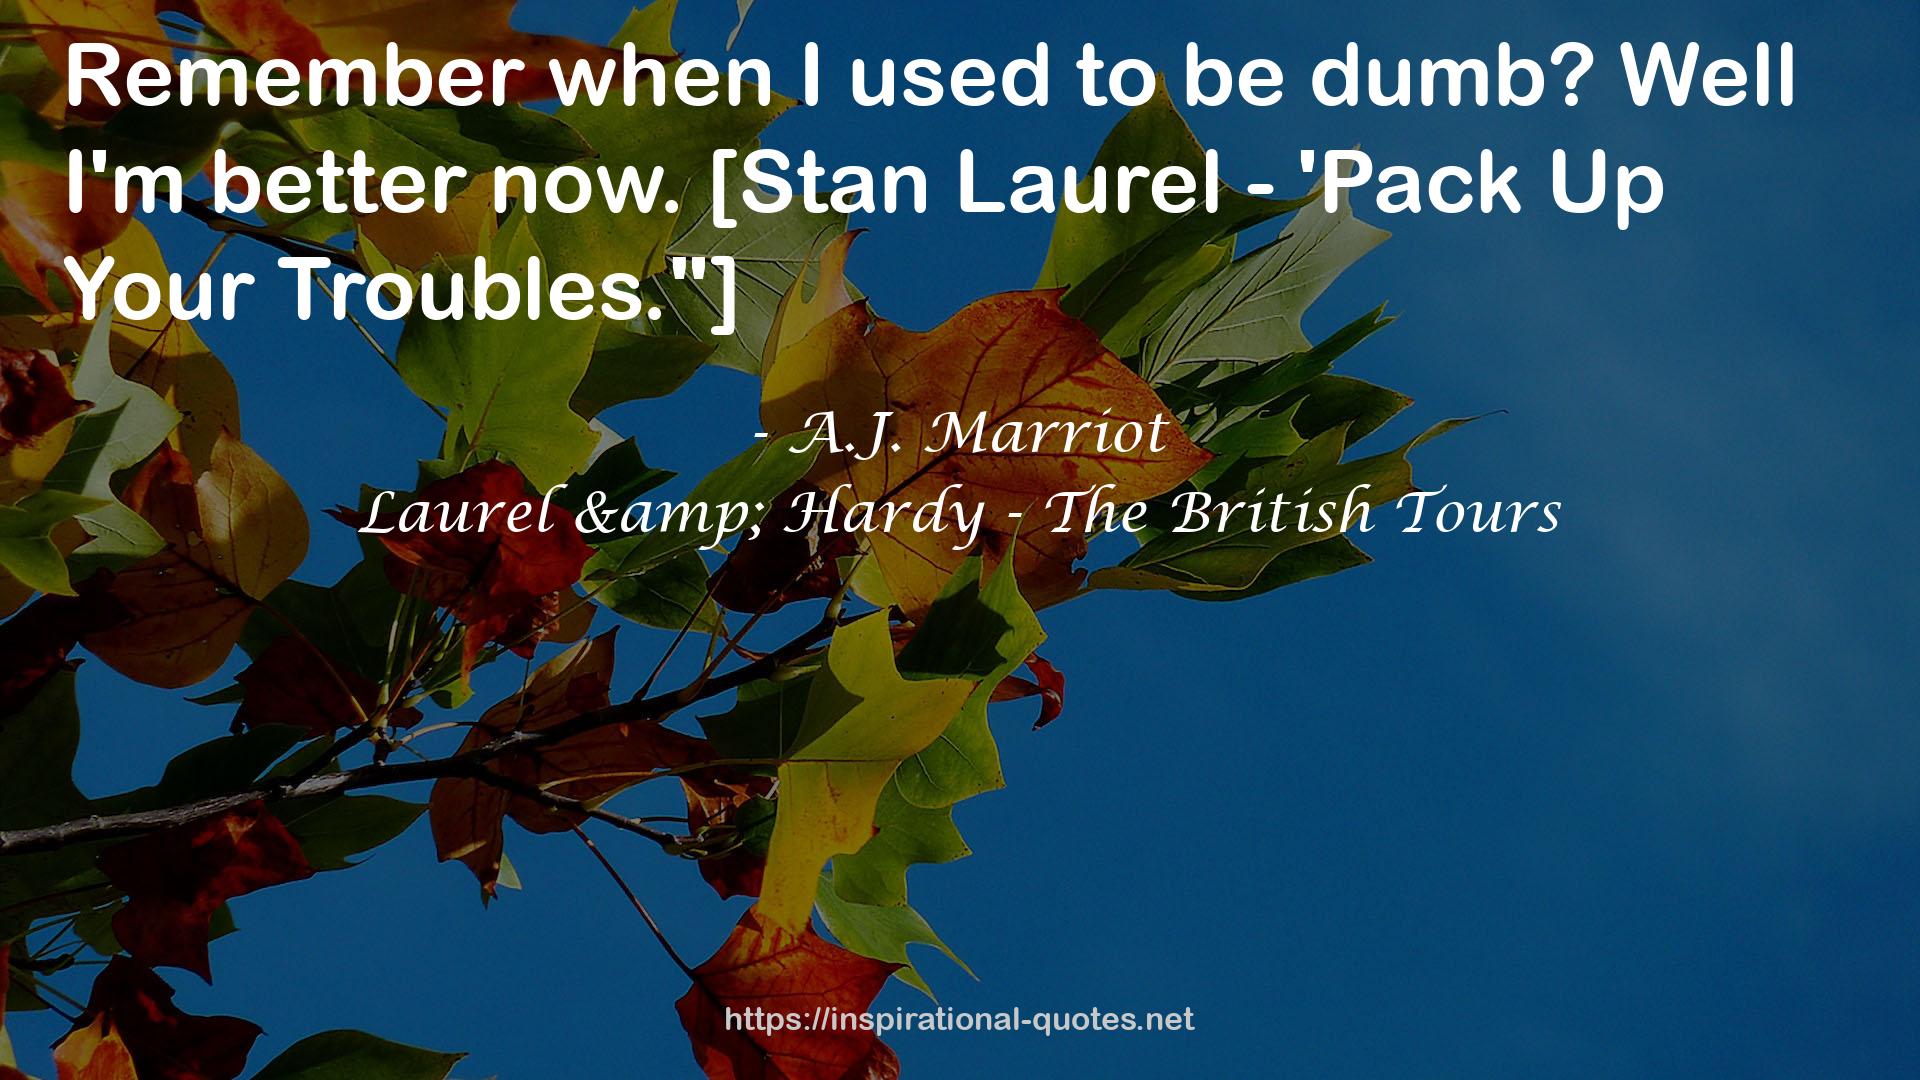 Laurel & Hardy - The British Tours QUOTES